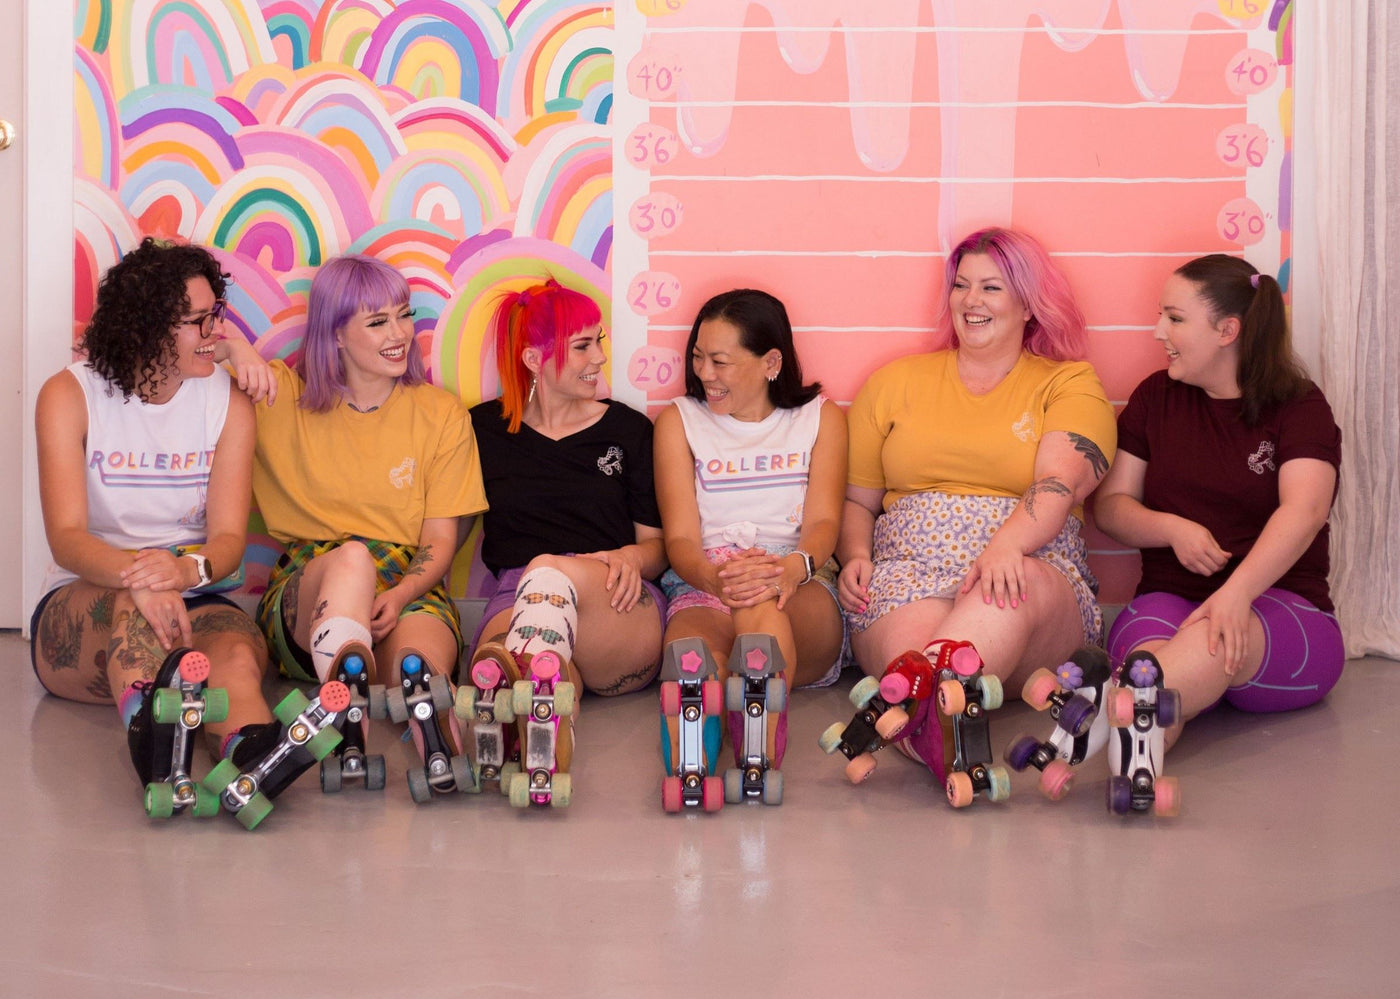 Six roller skaters in roller skates and rollerfit merchandise sitting down having a conversation.